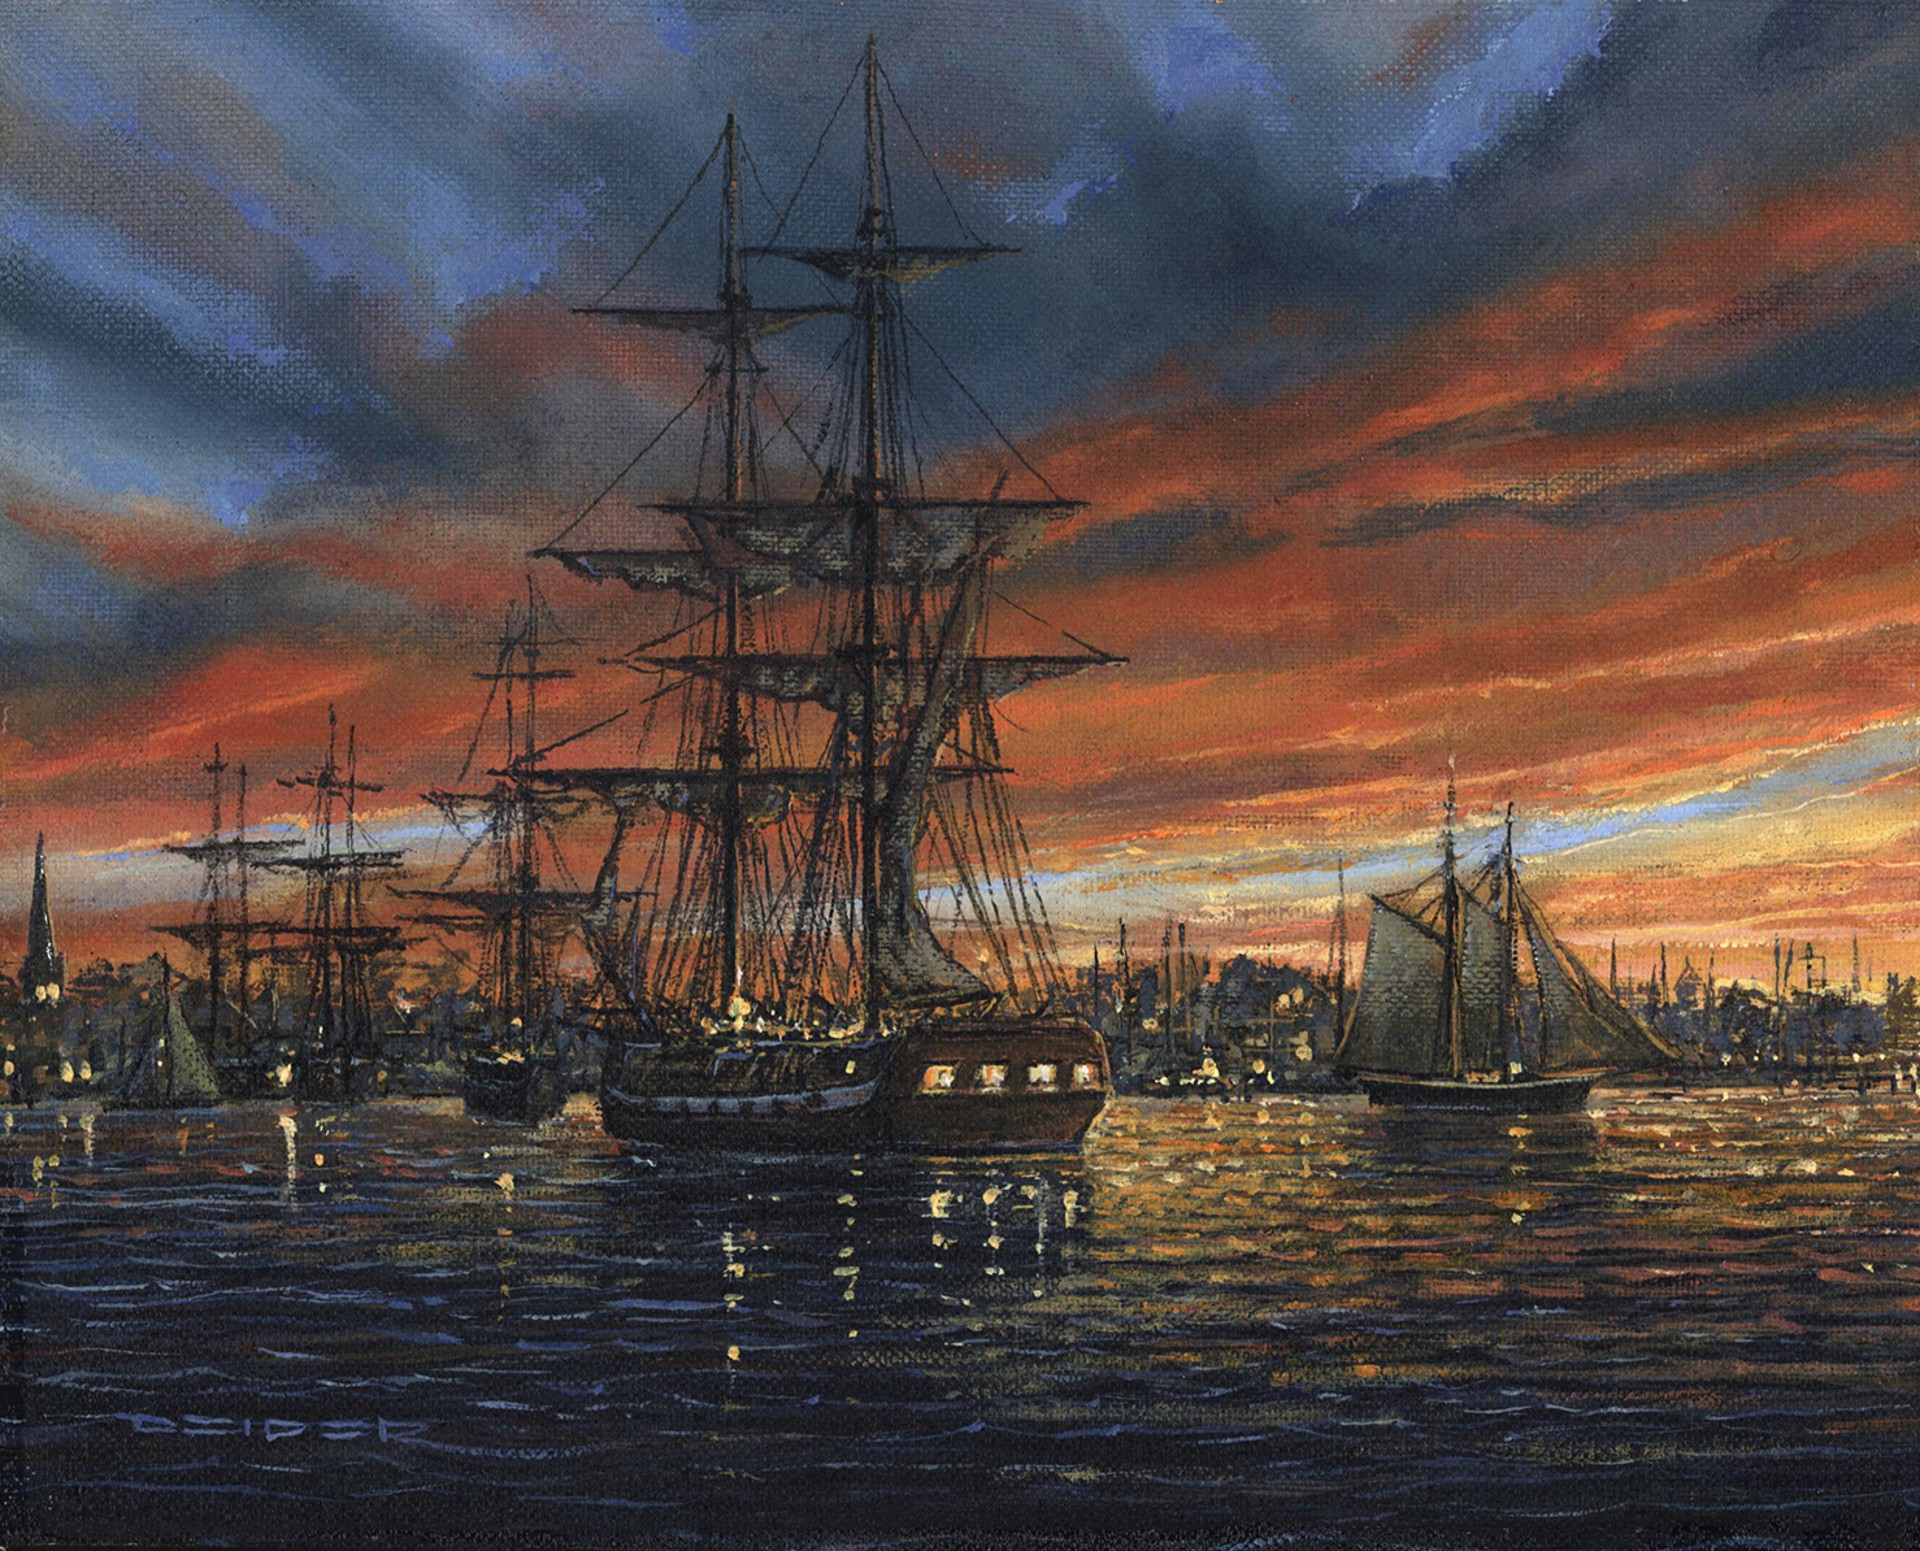 The Harbor Past by Doug Zider